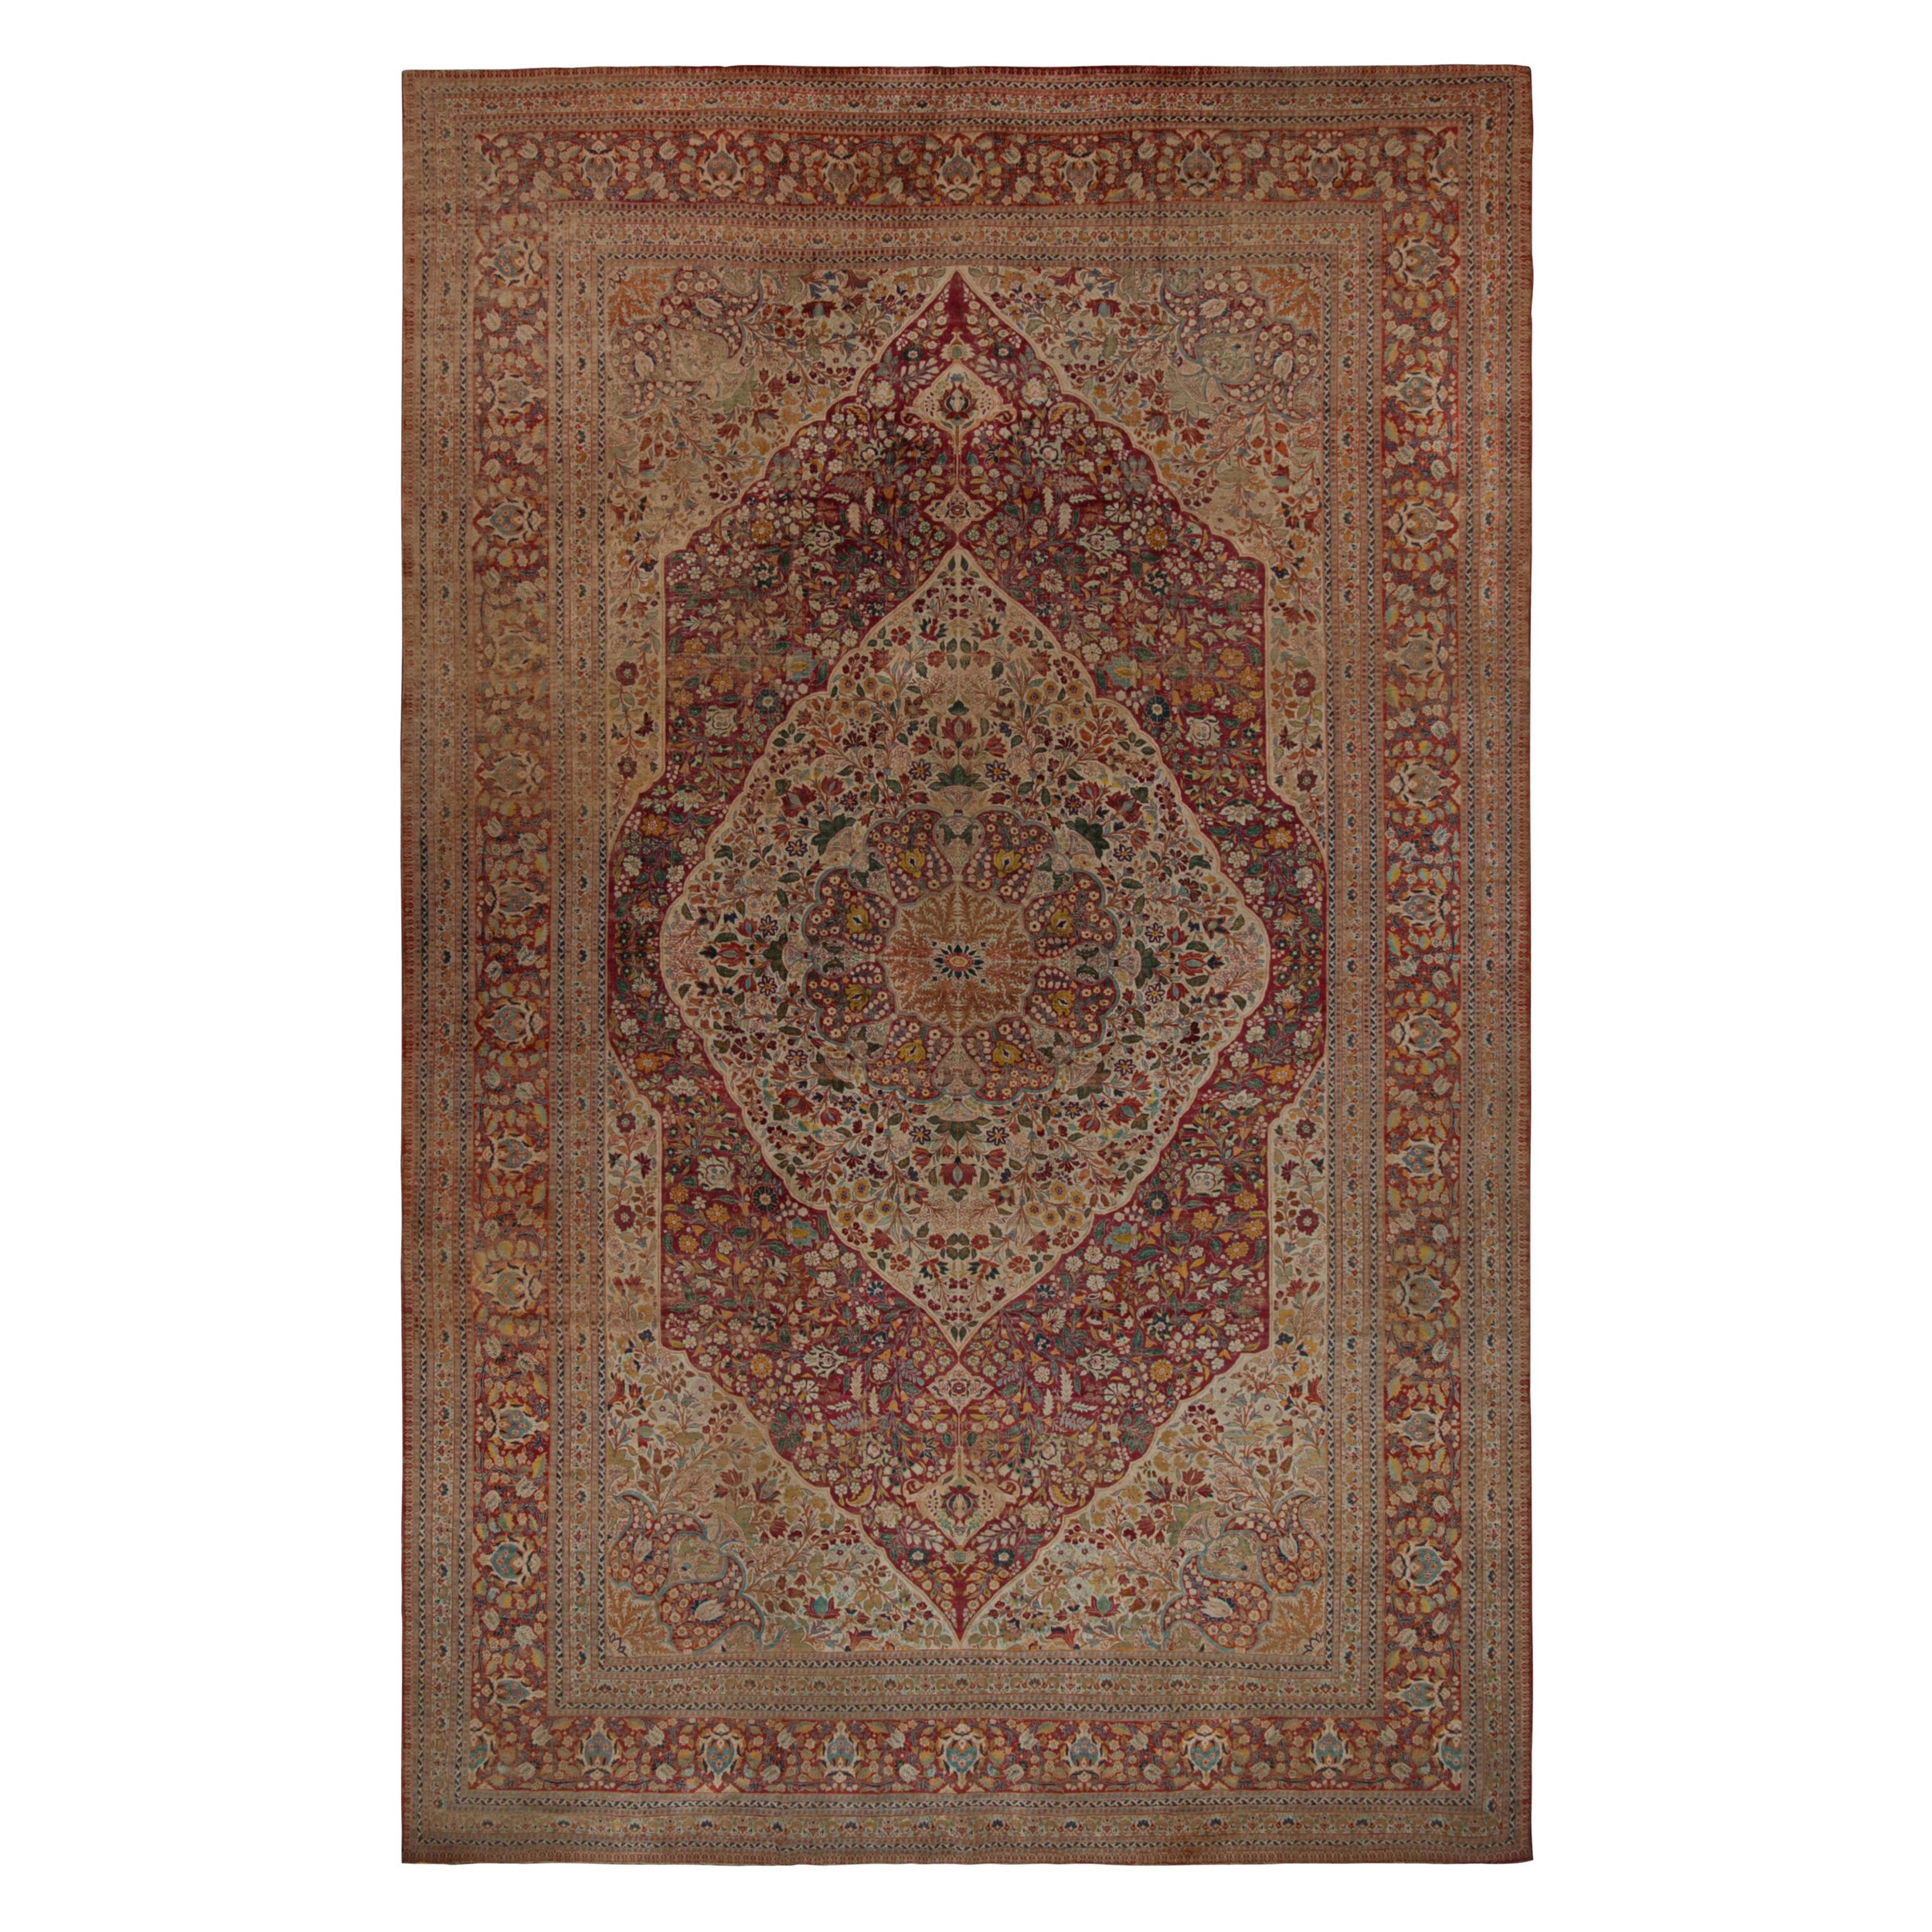 Antique Persian Tabriz Rug, in Brown, with Floral Patterns, from Rug & Kilim